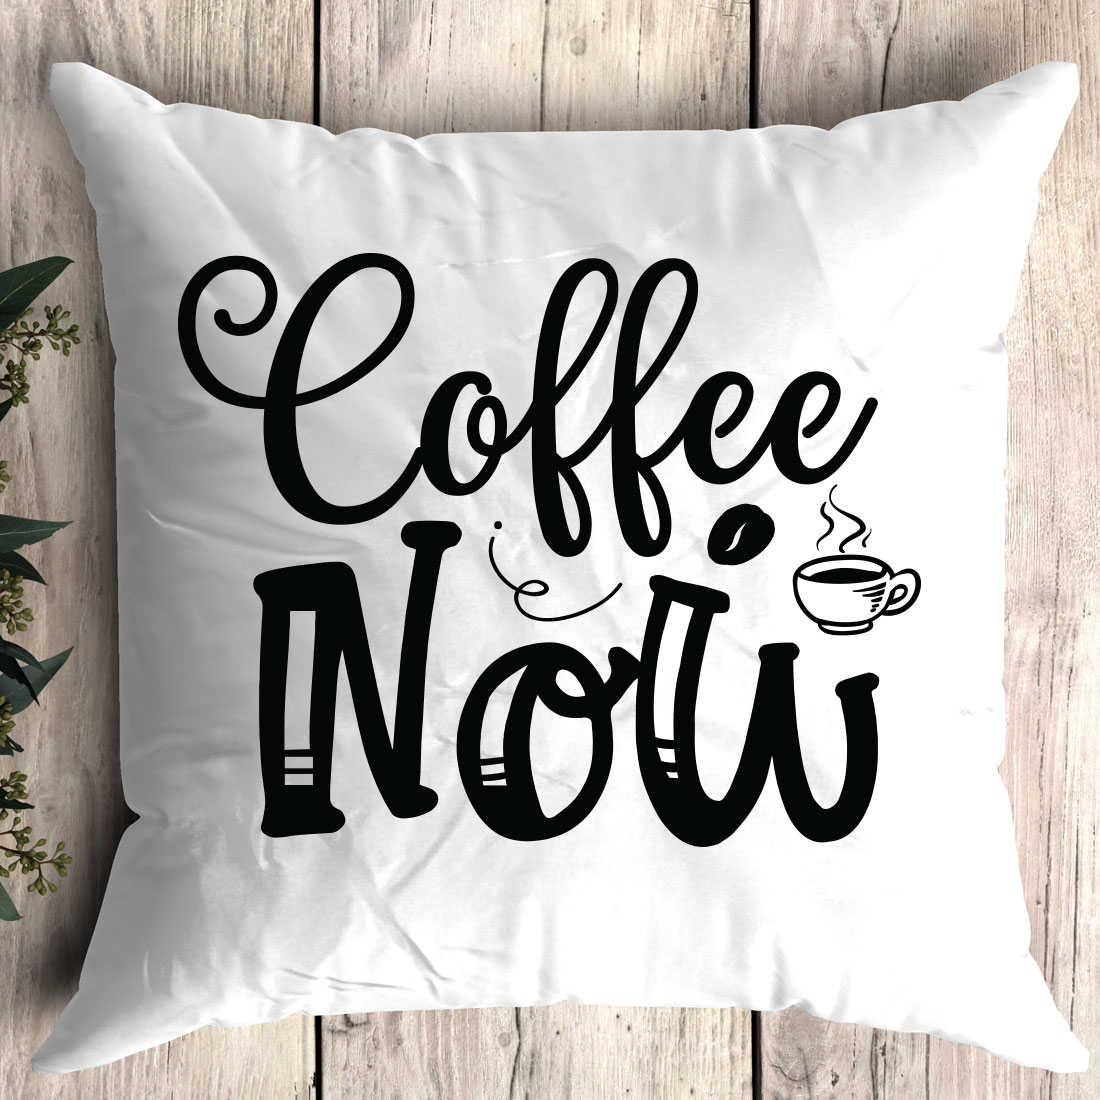 White pillow with the words coffee now printed on it.